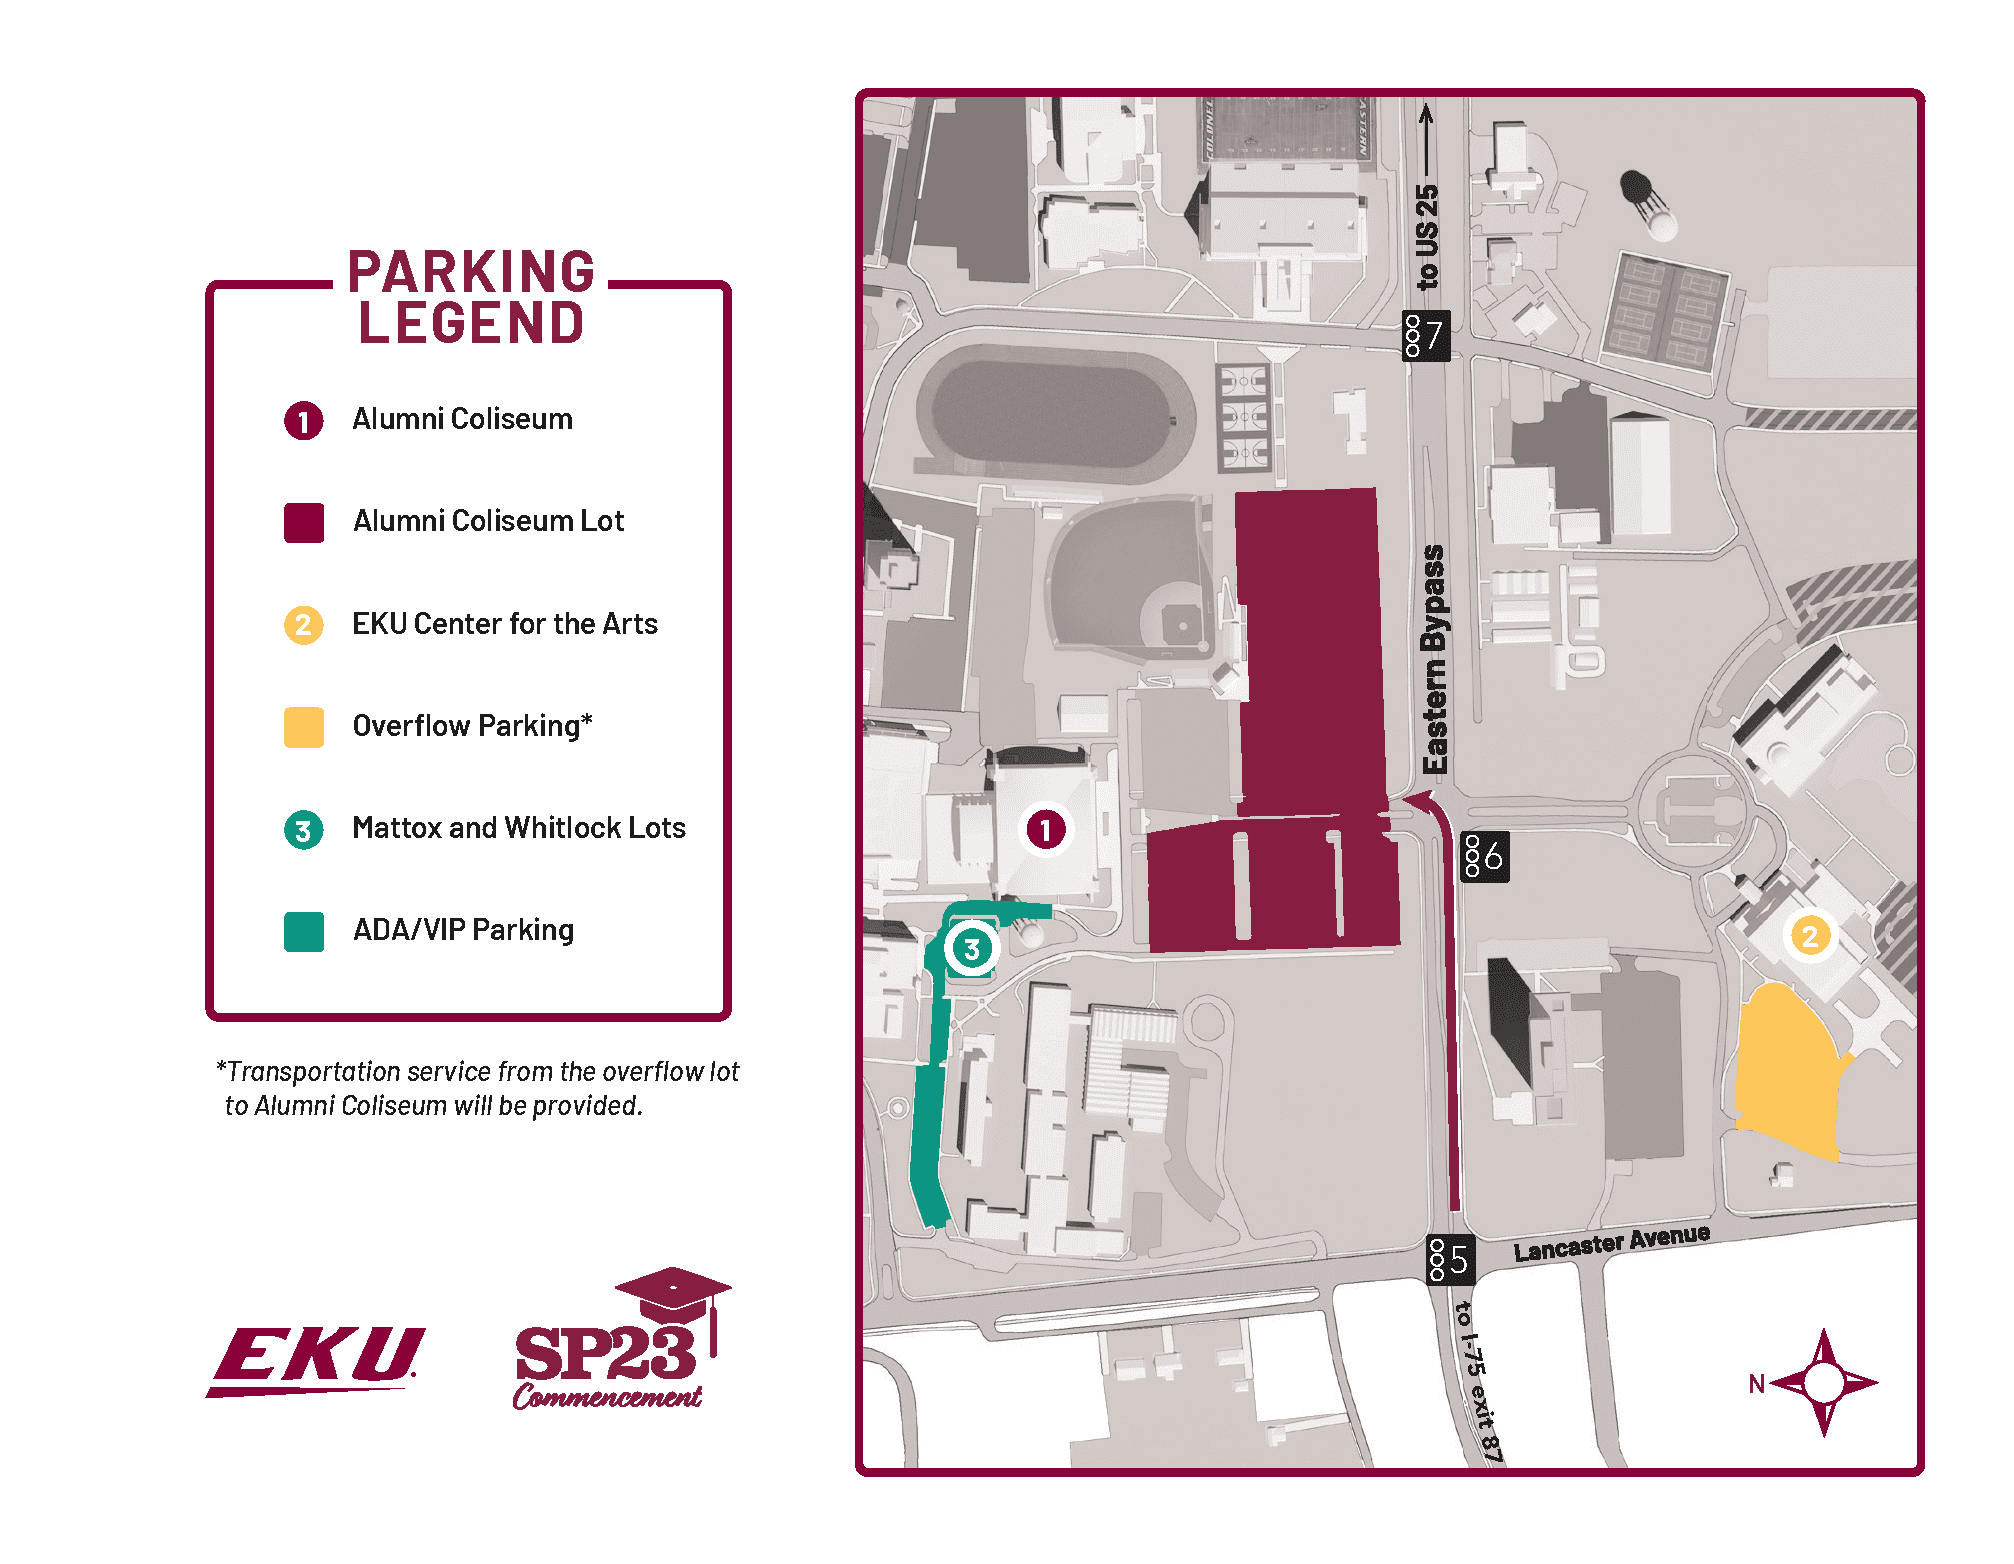 An image of the Eastern Kentucky University graduation parking map, with a parking legend saying "Alumni Coliseum", "Alumni Coliseum Lot", "EKU Center for the Arts", "Overflow Parking", "Mattox and Whitlock Lots", and "ADA/VIP Parking".